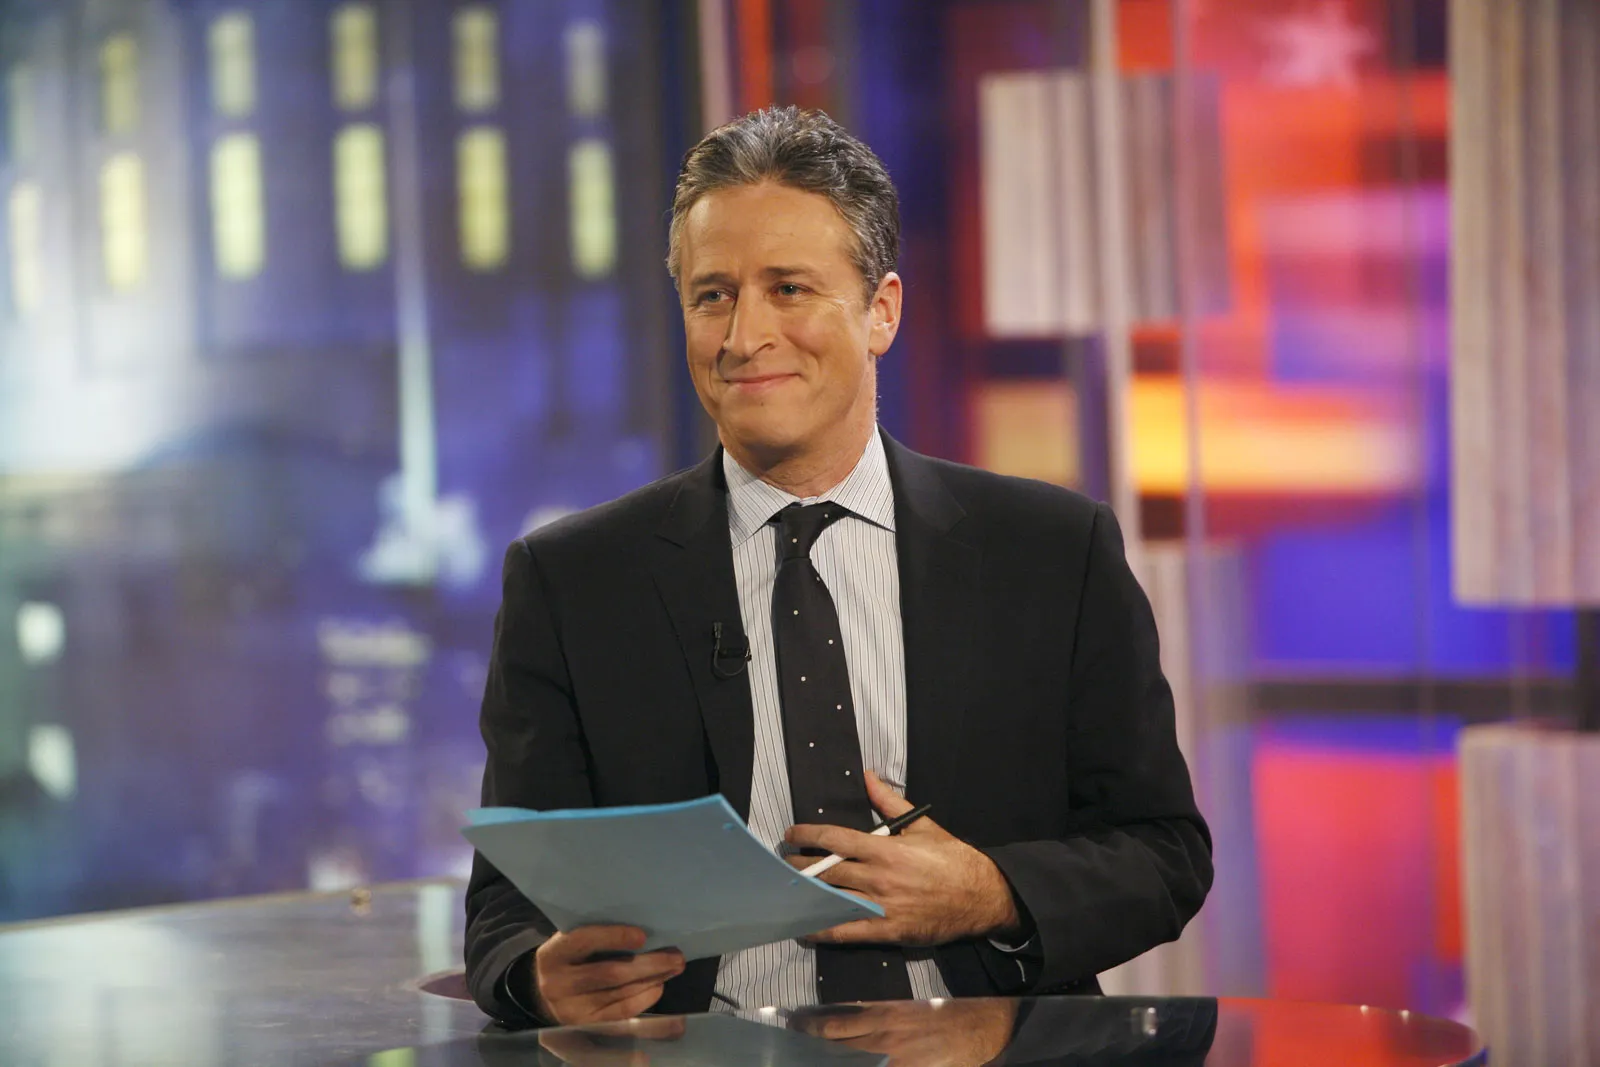 Jon Stewart's successful career in the entertainment industry